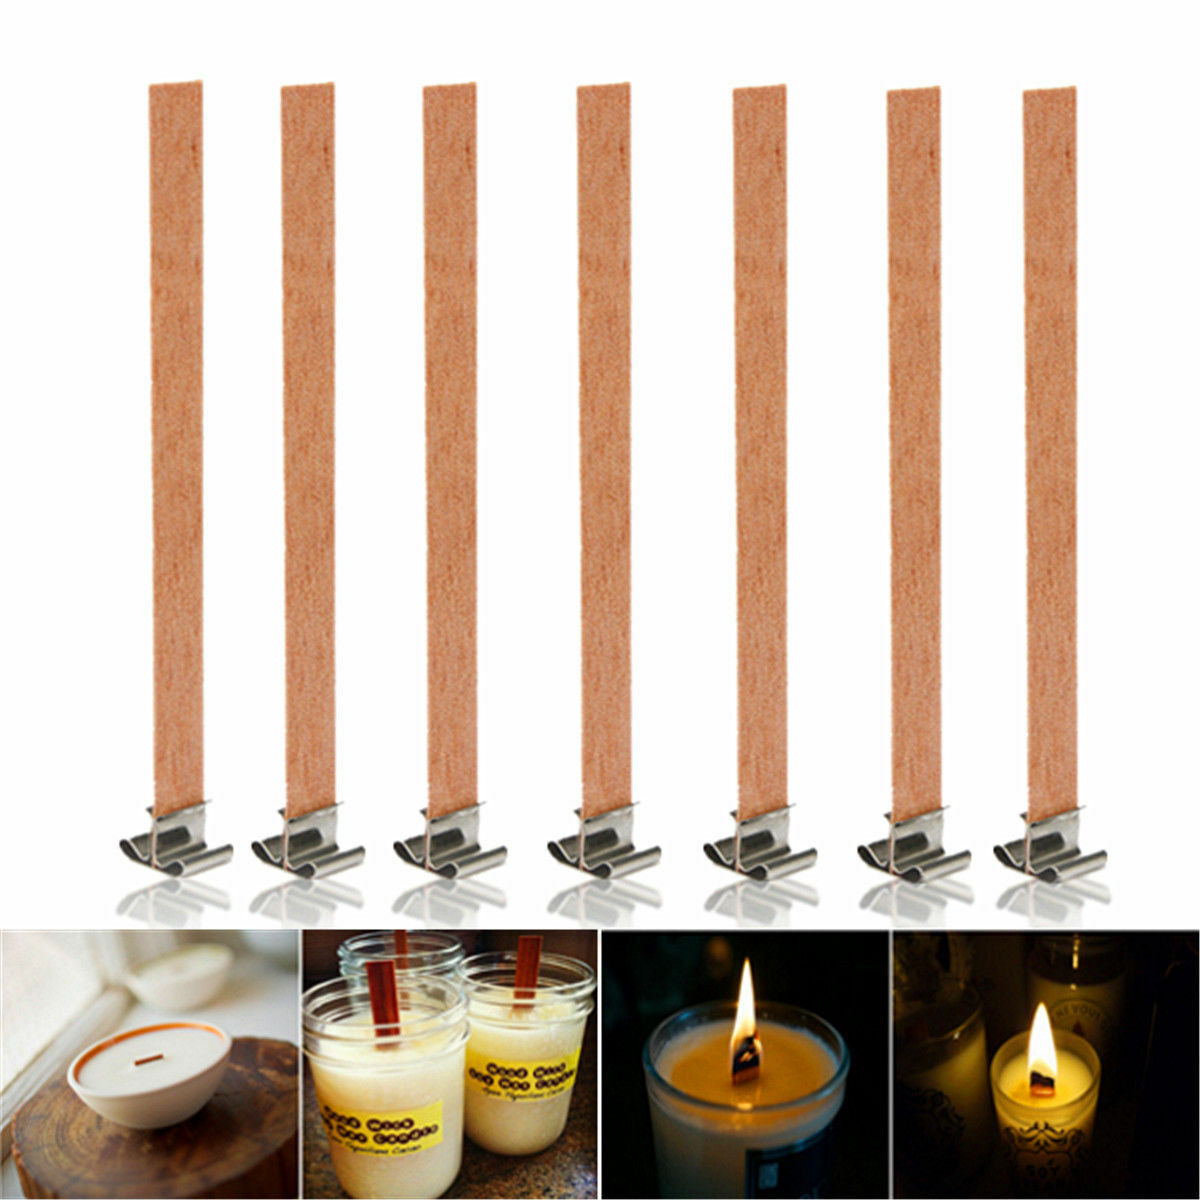 10pcs 13mm x 130mm Candle Wood Wick With Sustainer Tab Candle Making Supplies